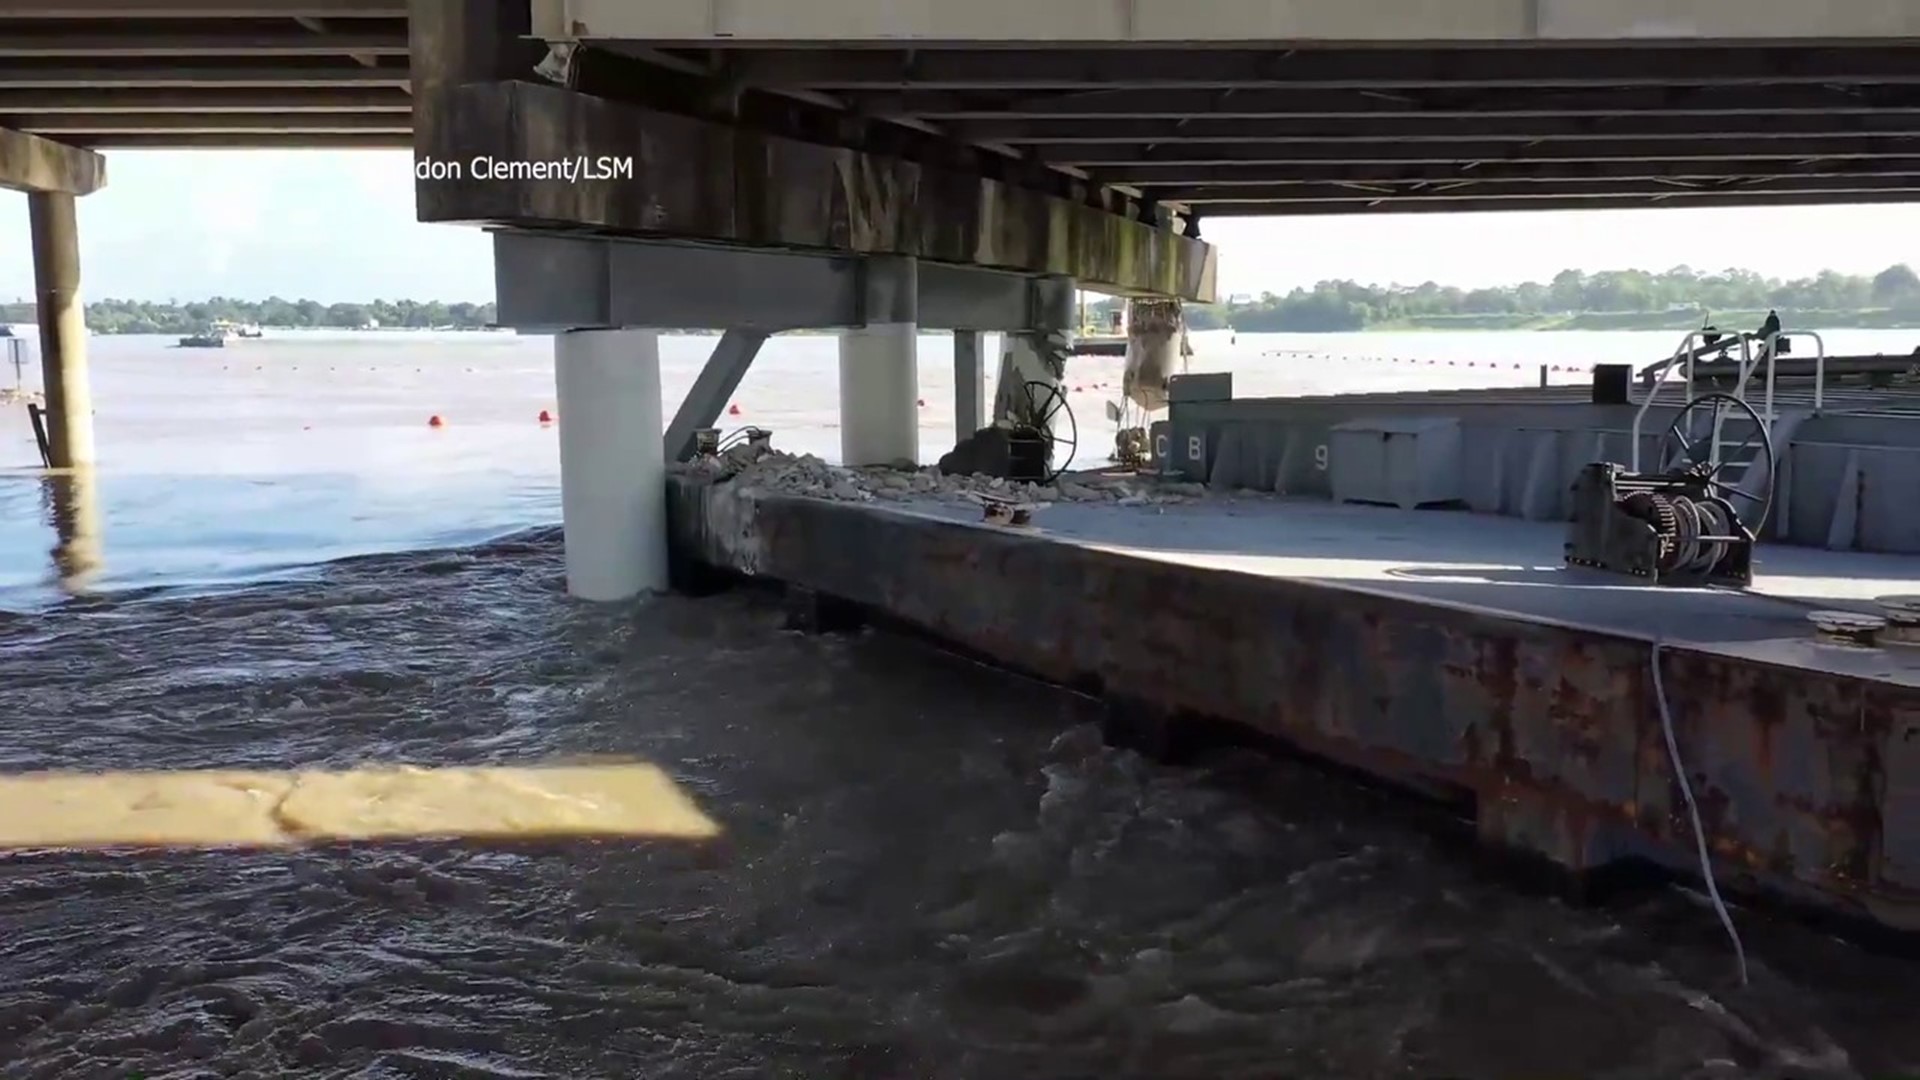 Incredible drone video shows aftermath of barge crash into Houston